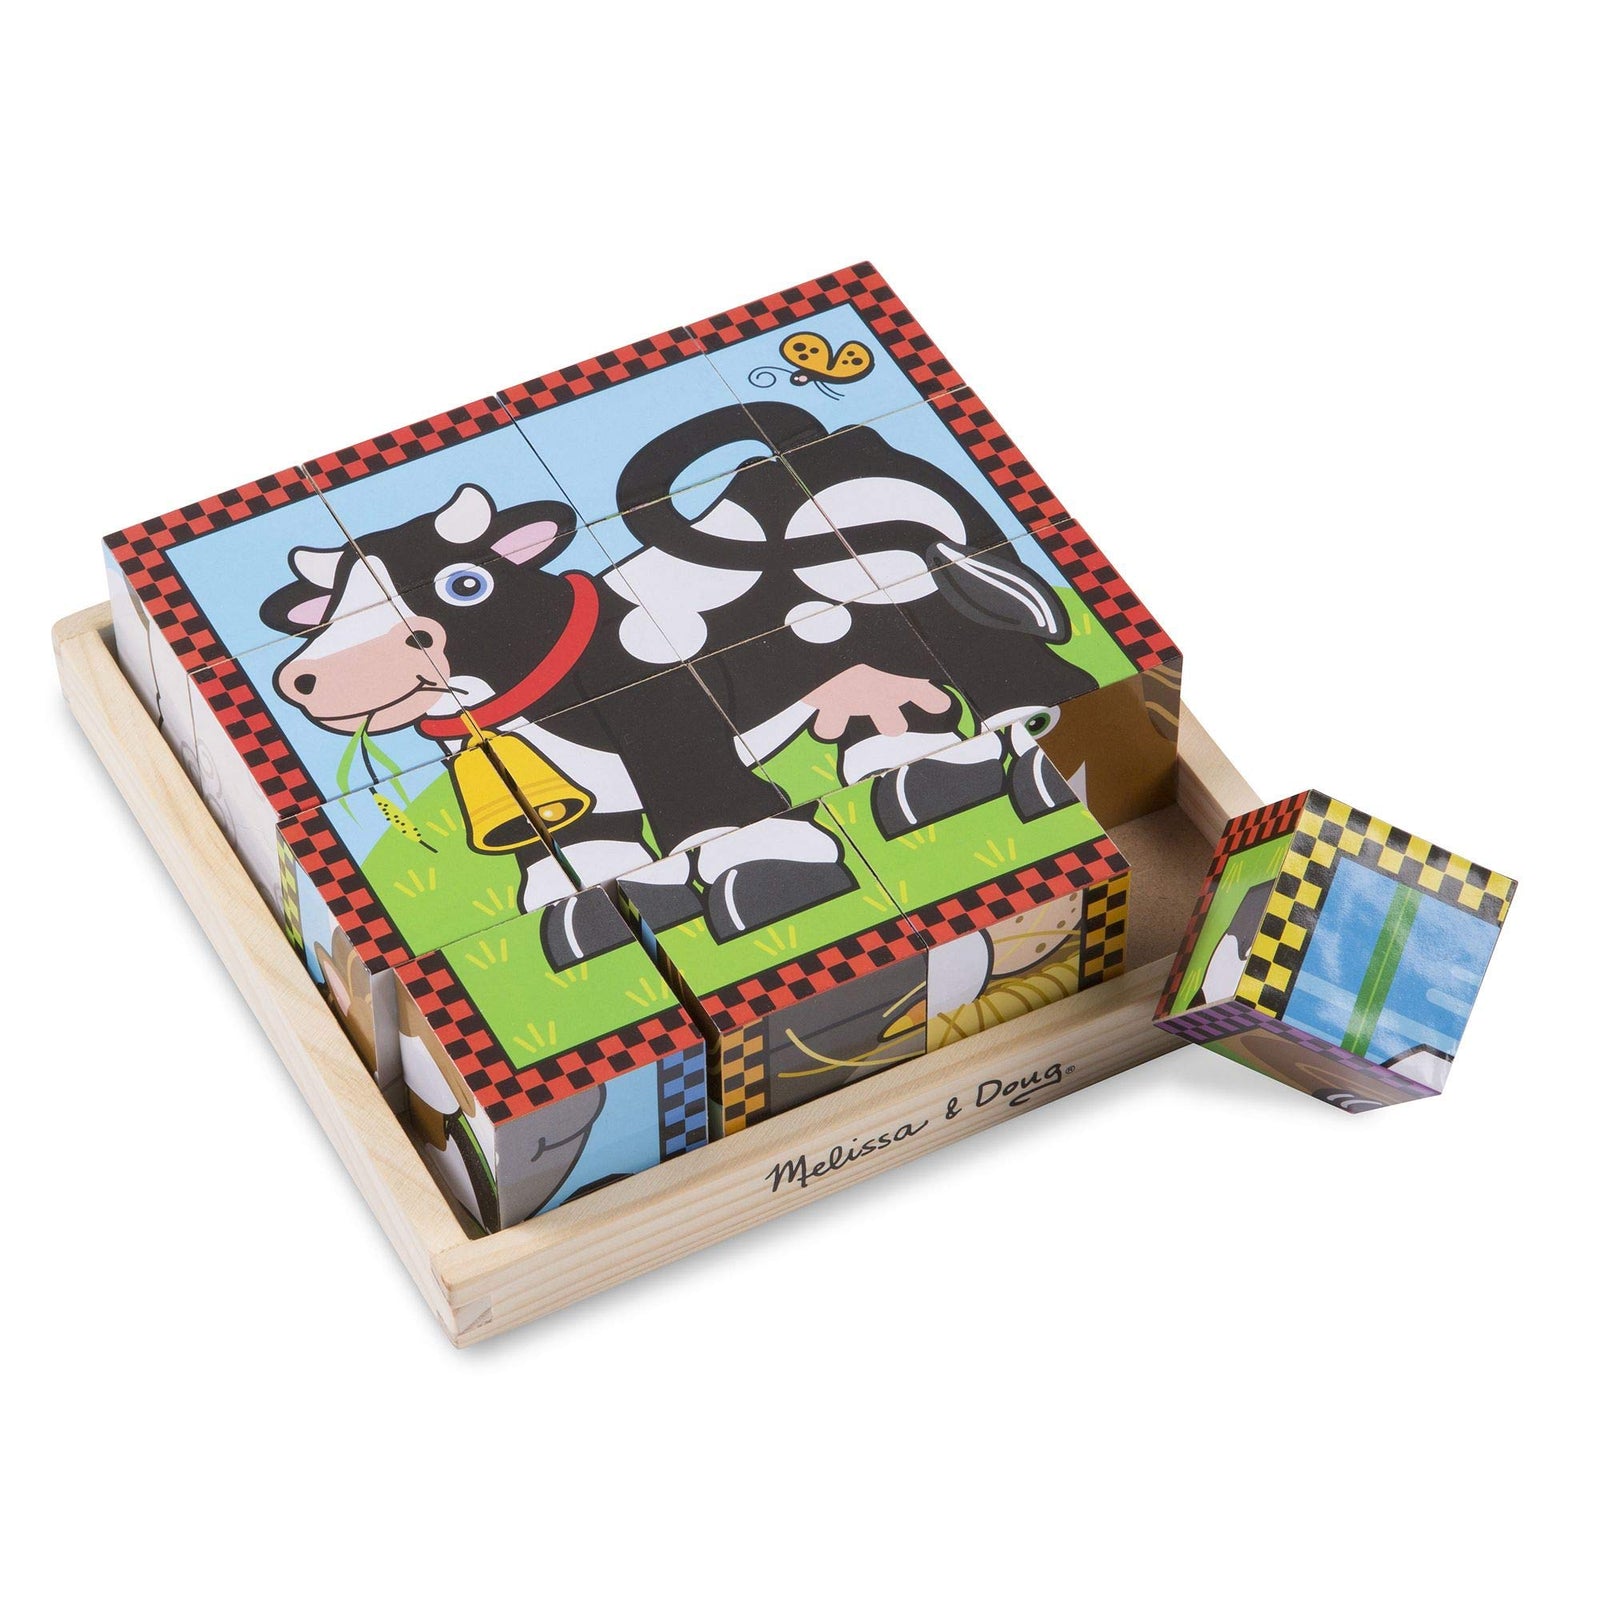 Melissa & Doug Farm Wooden Cube Puzzle With Storage Tray - 6 Puzzles in 1 (16 pcs)